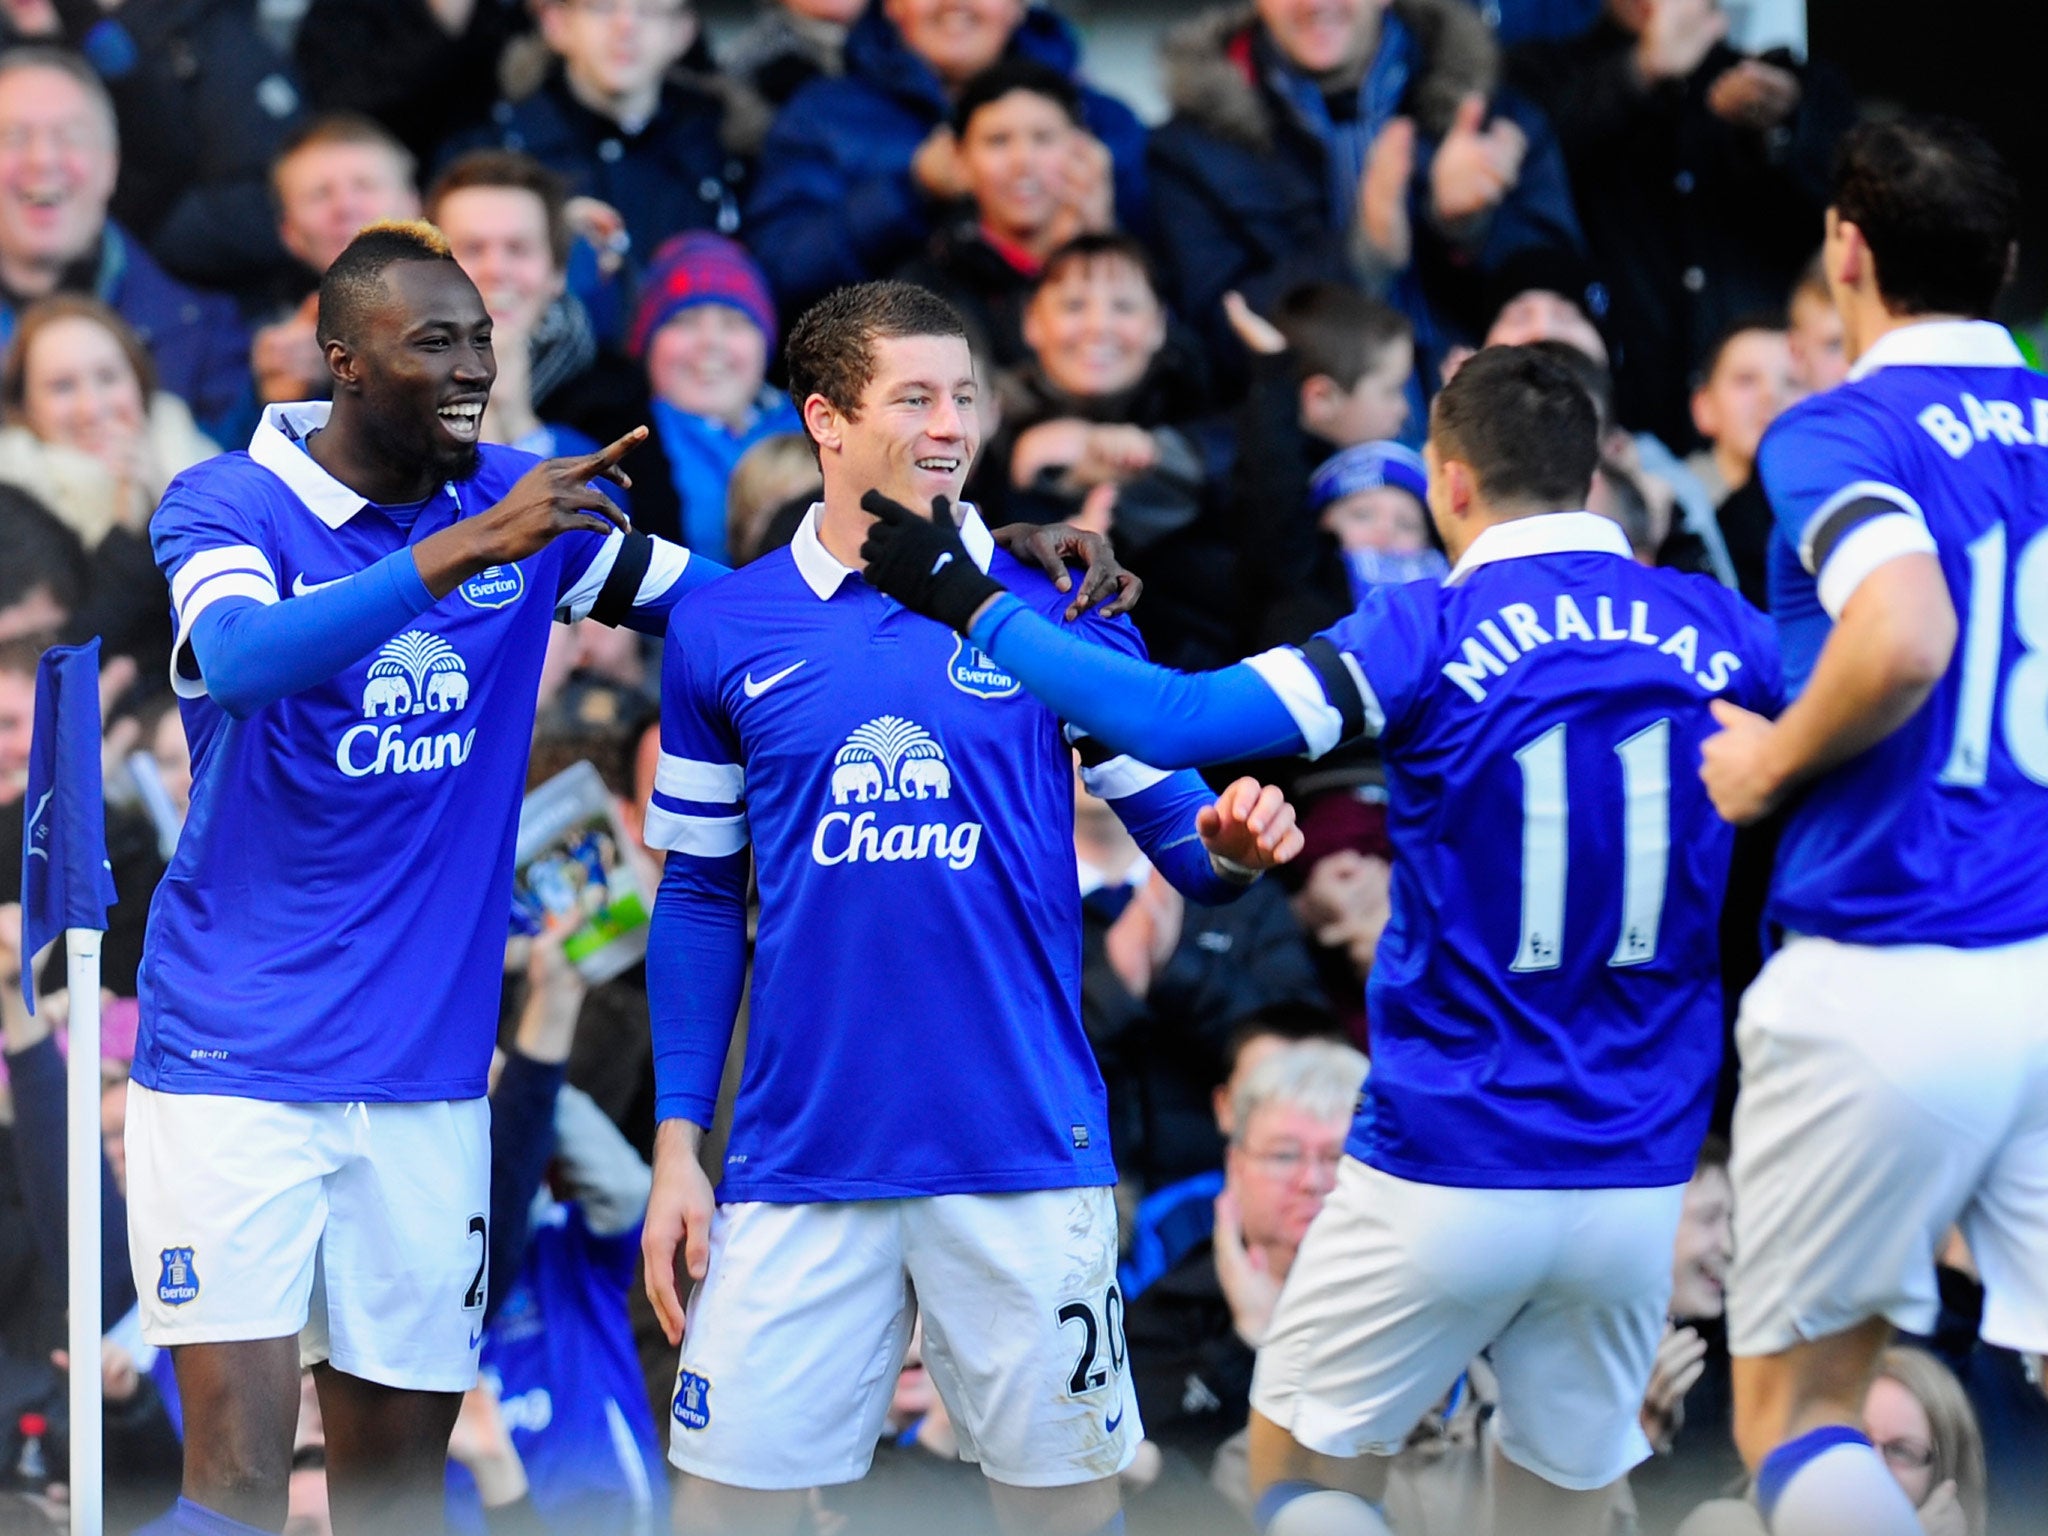 Lacina Traore celebrates scoring in the FA Cup on his debut for Everton